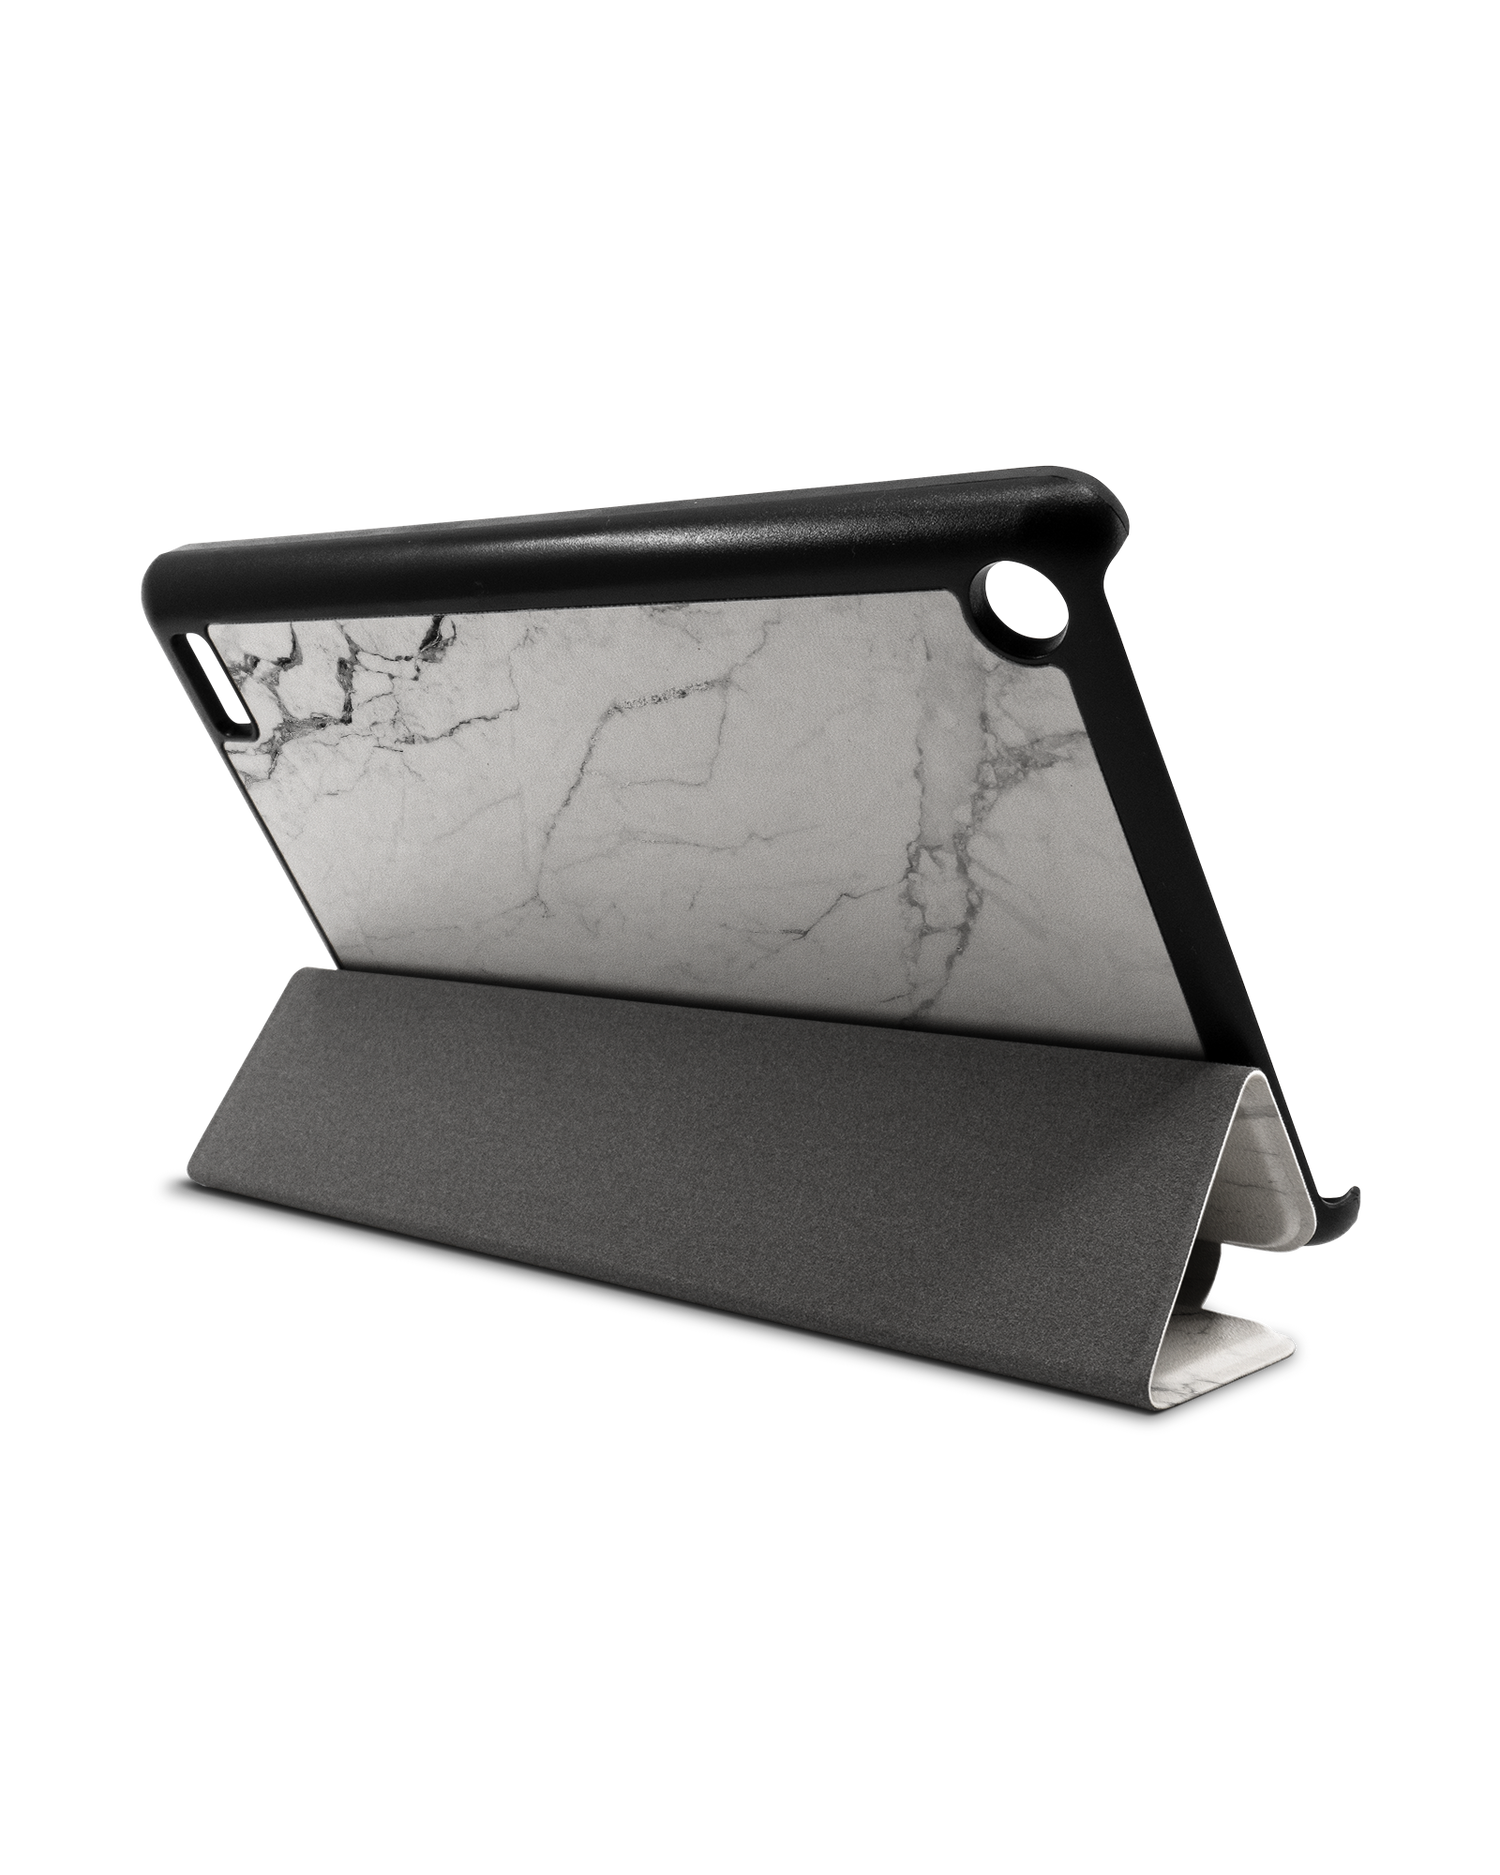 White Marble Tablet Smart Case for Amazon Fire 7: Used as Stand